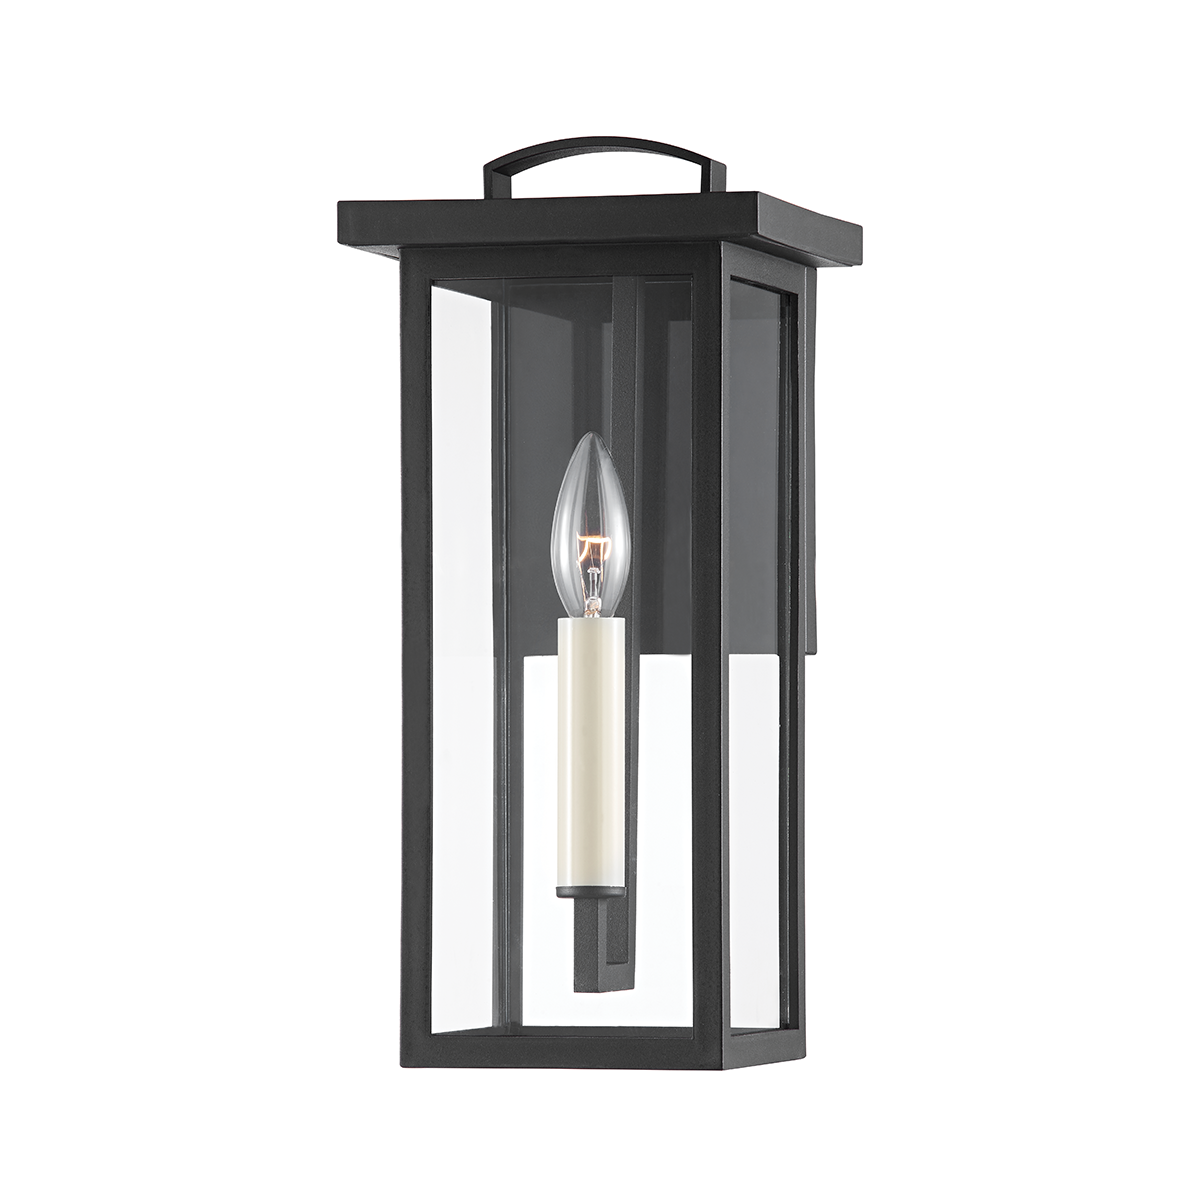 Troy EDEN 1 LIGHT SMALL EXTERIOR WALL SCONCE B7521 Outdoor l Wall Troy Lighting   